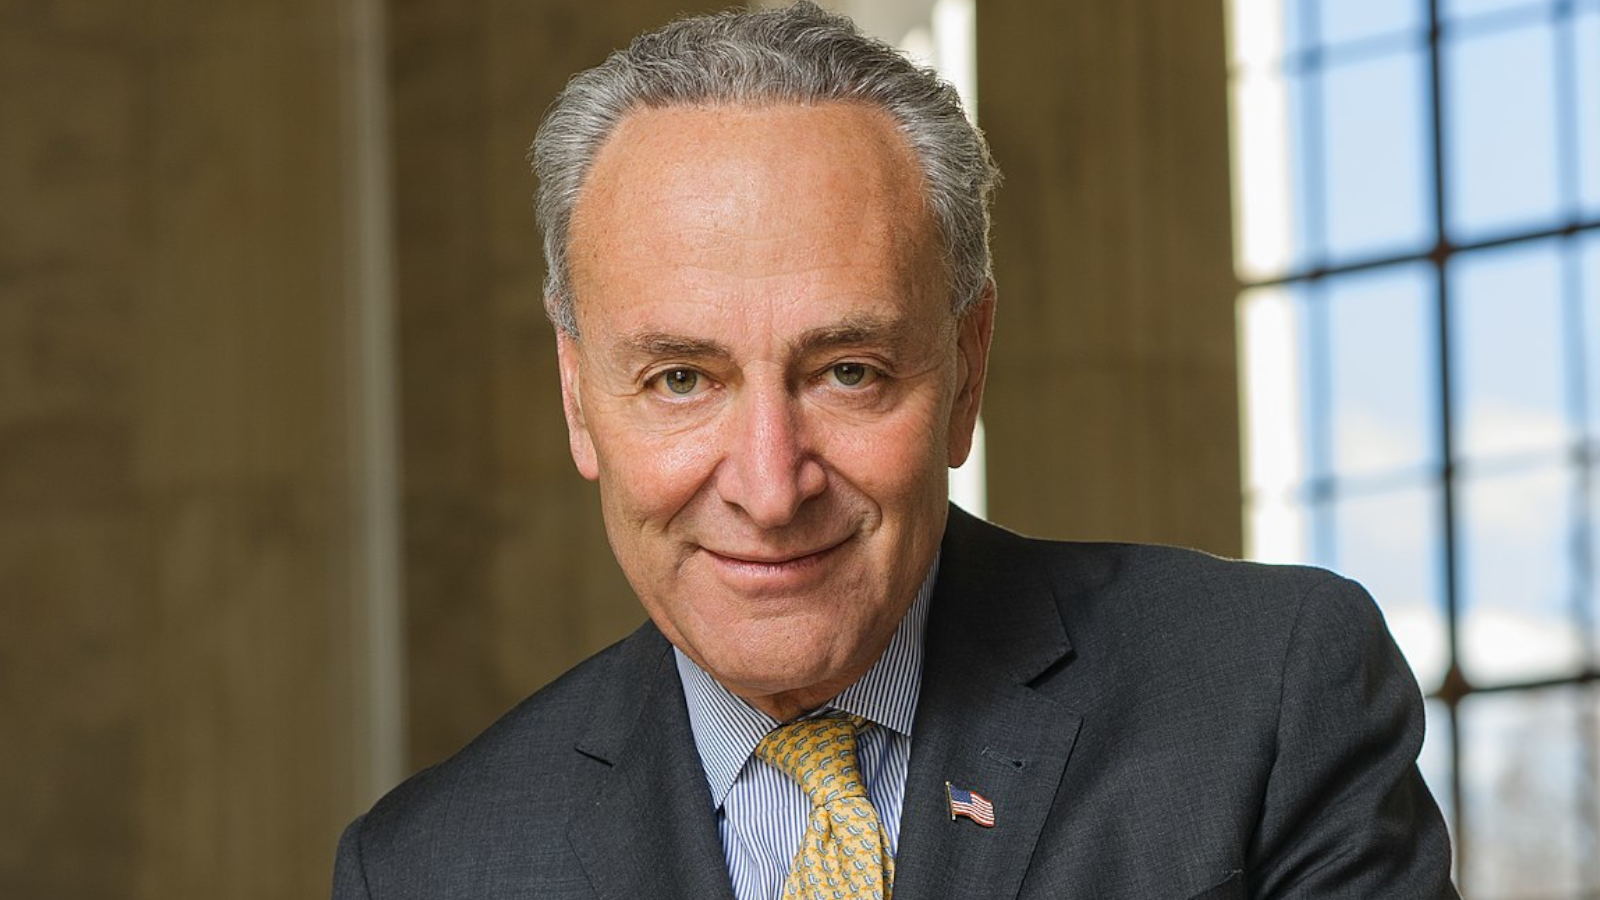 Chuck Schumer to Use Injured Soldier to Secure More Funding For Ukraine at State of The Union